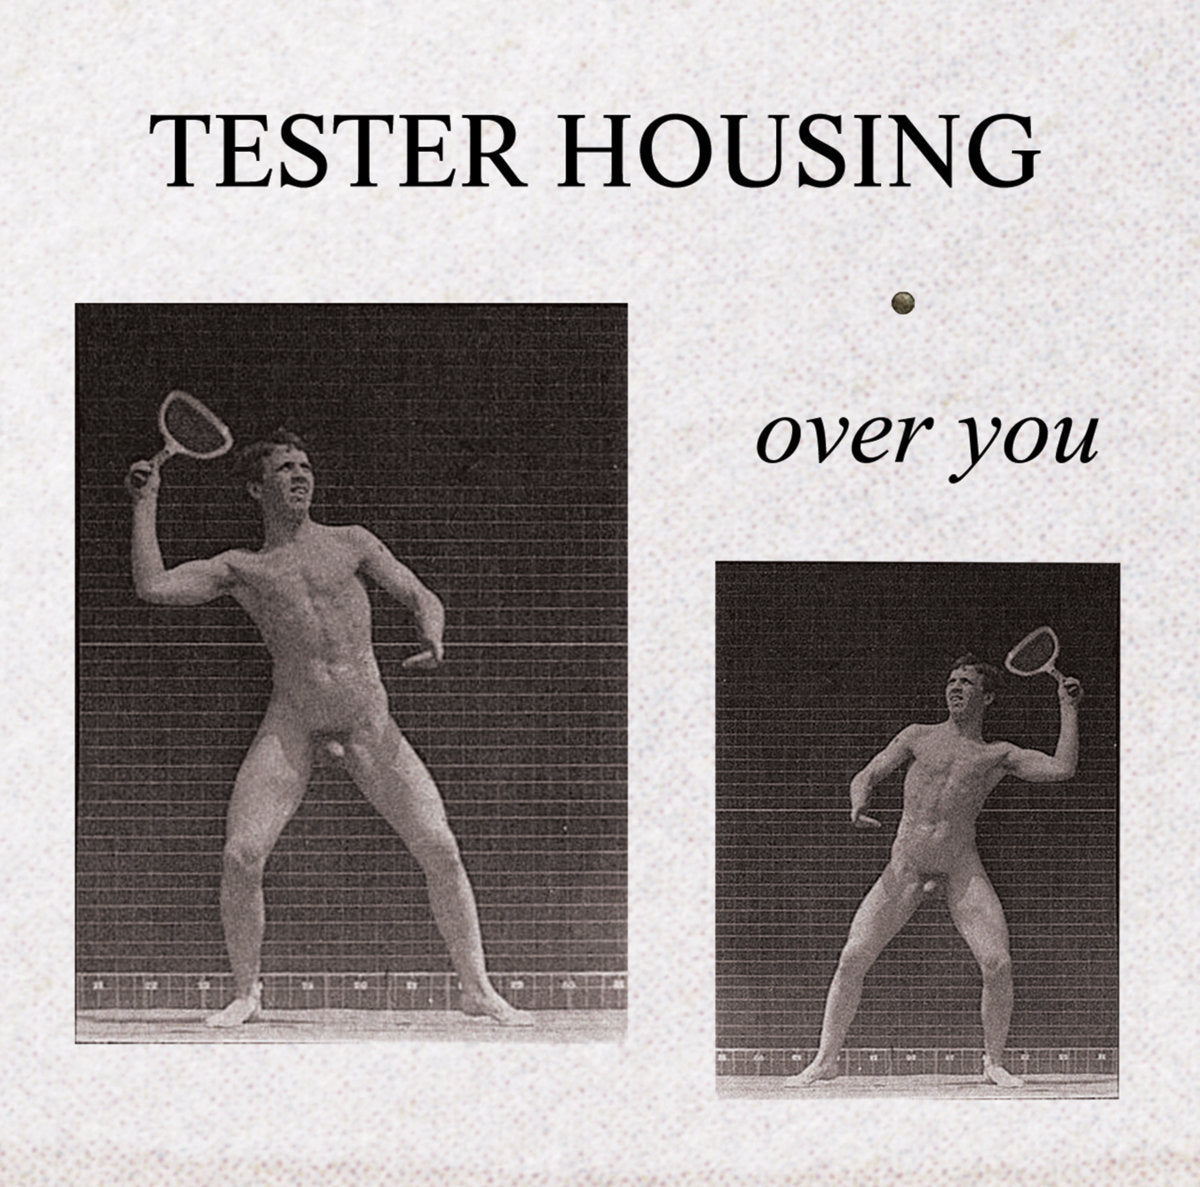 TESTER HOUSING - "OVER YOU" 12"